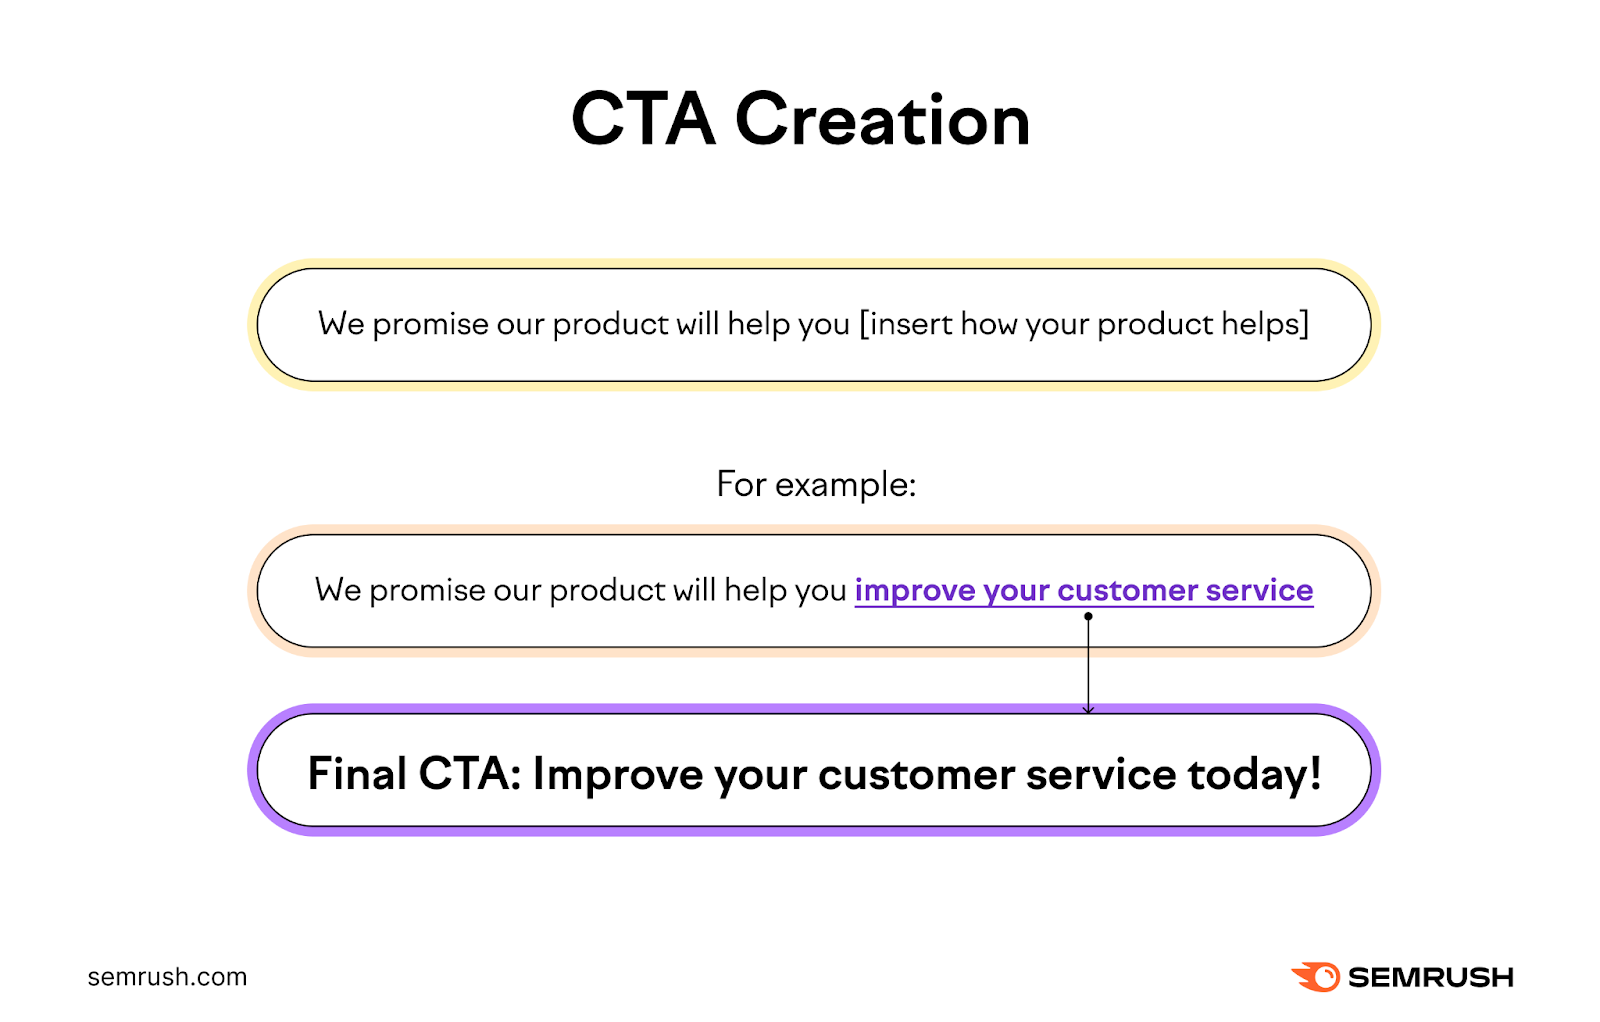 An infographic by Semrush showing an example of CTA creation